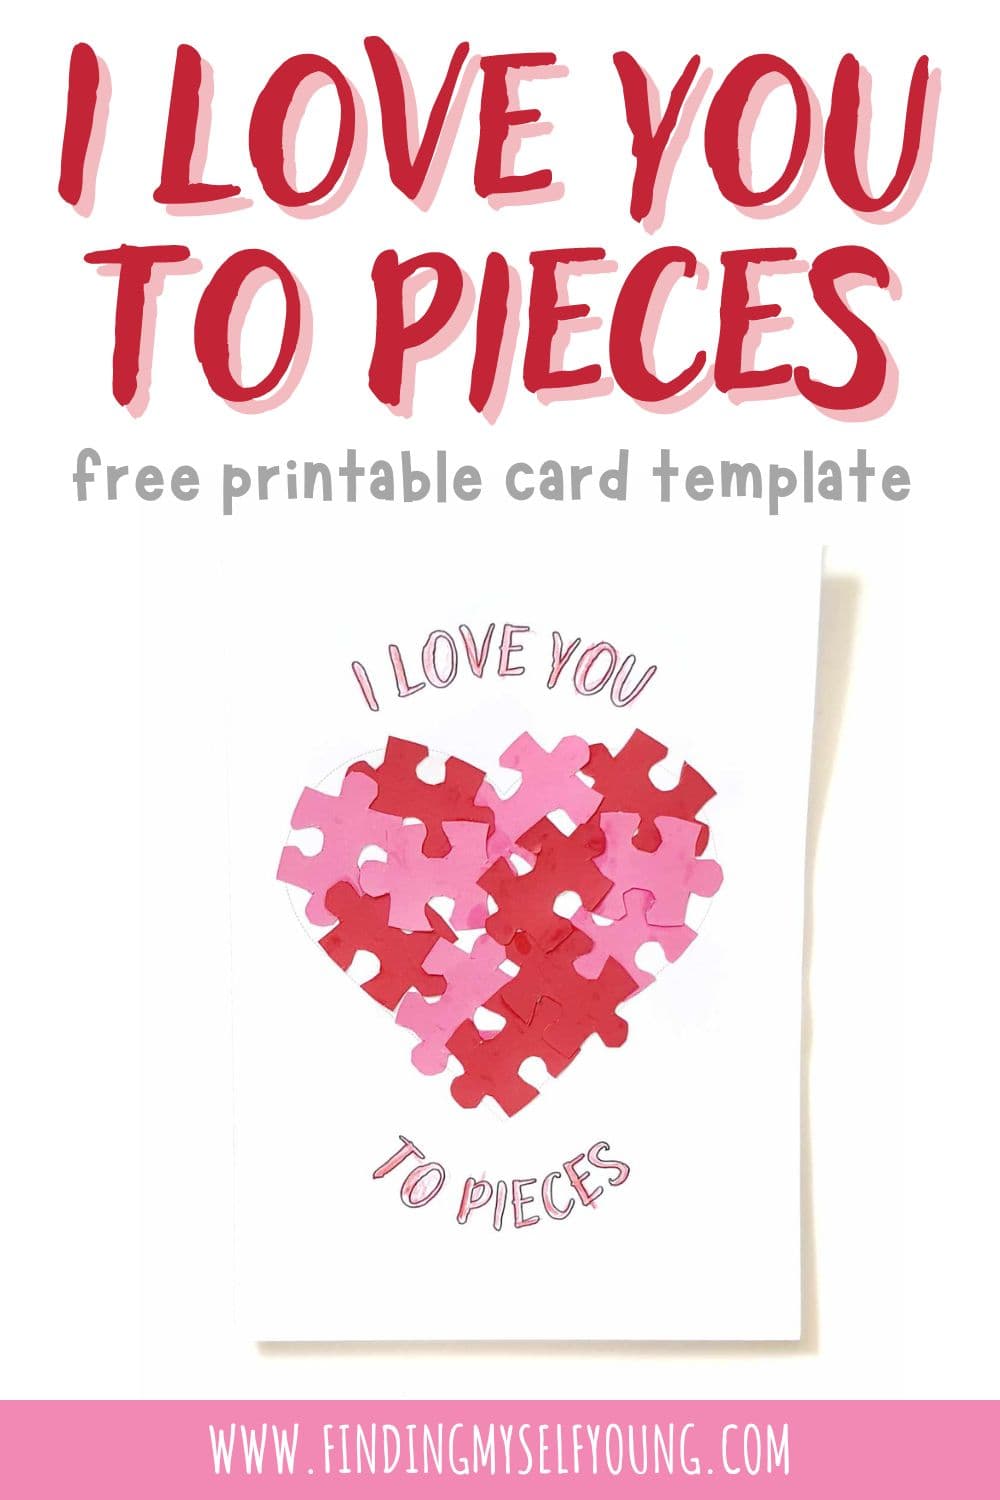 I love you to pieces free printable card template.